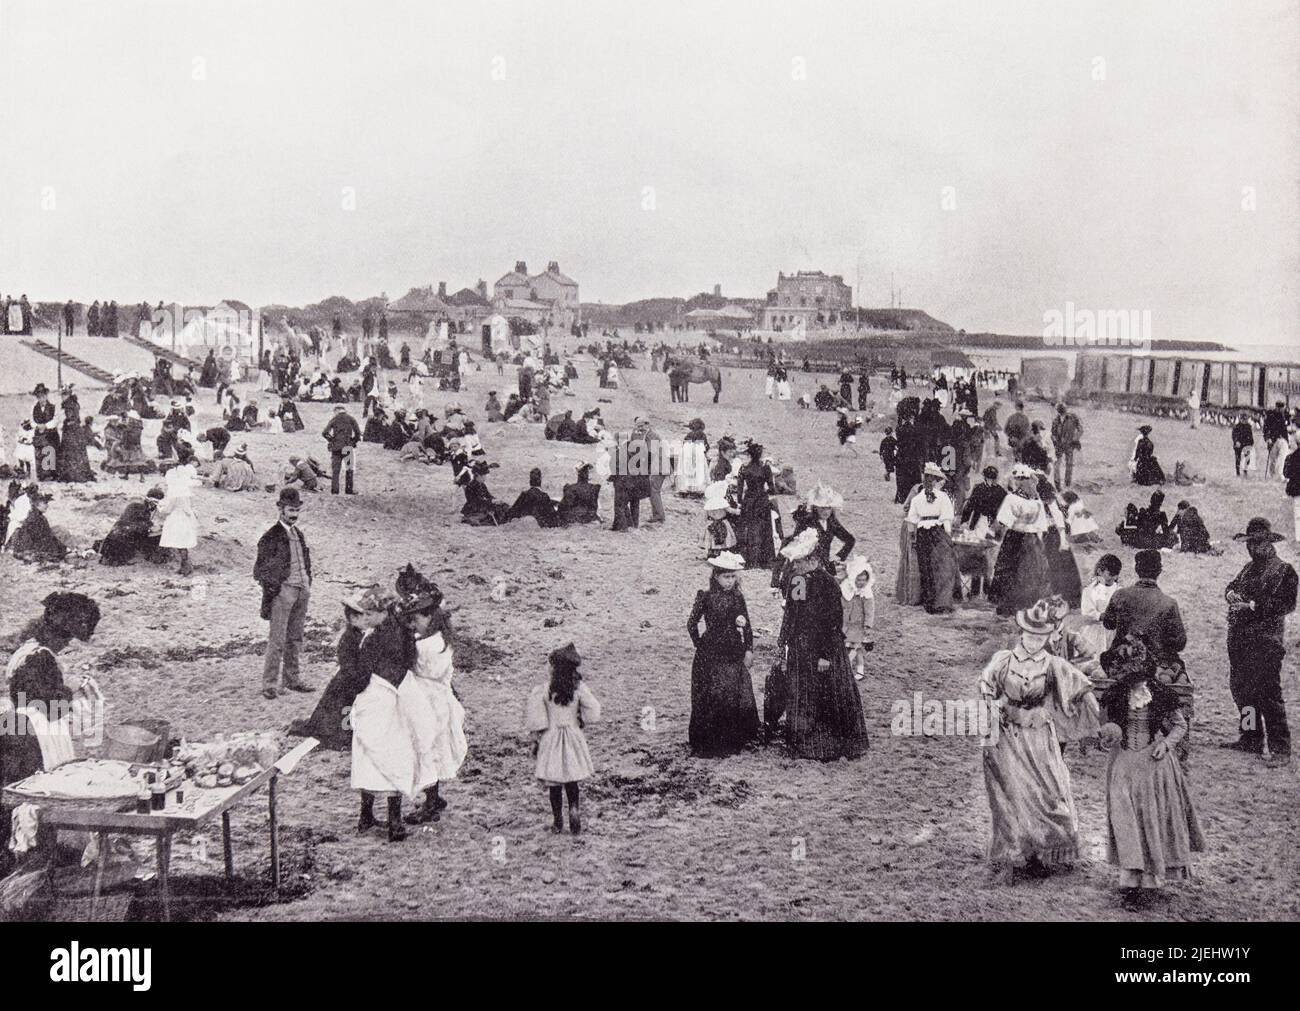 Walton-on-the-Naze, Essex, England, seen here in the 19th century.  From Around The Coast,  An Album of Pictures from Photographs of the Chief Seaside Places of Interest in Great Britain and Ireland published London, 1895, by George Newnes Limited. Stock Photo